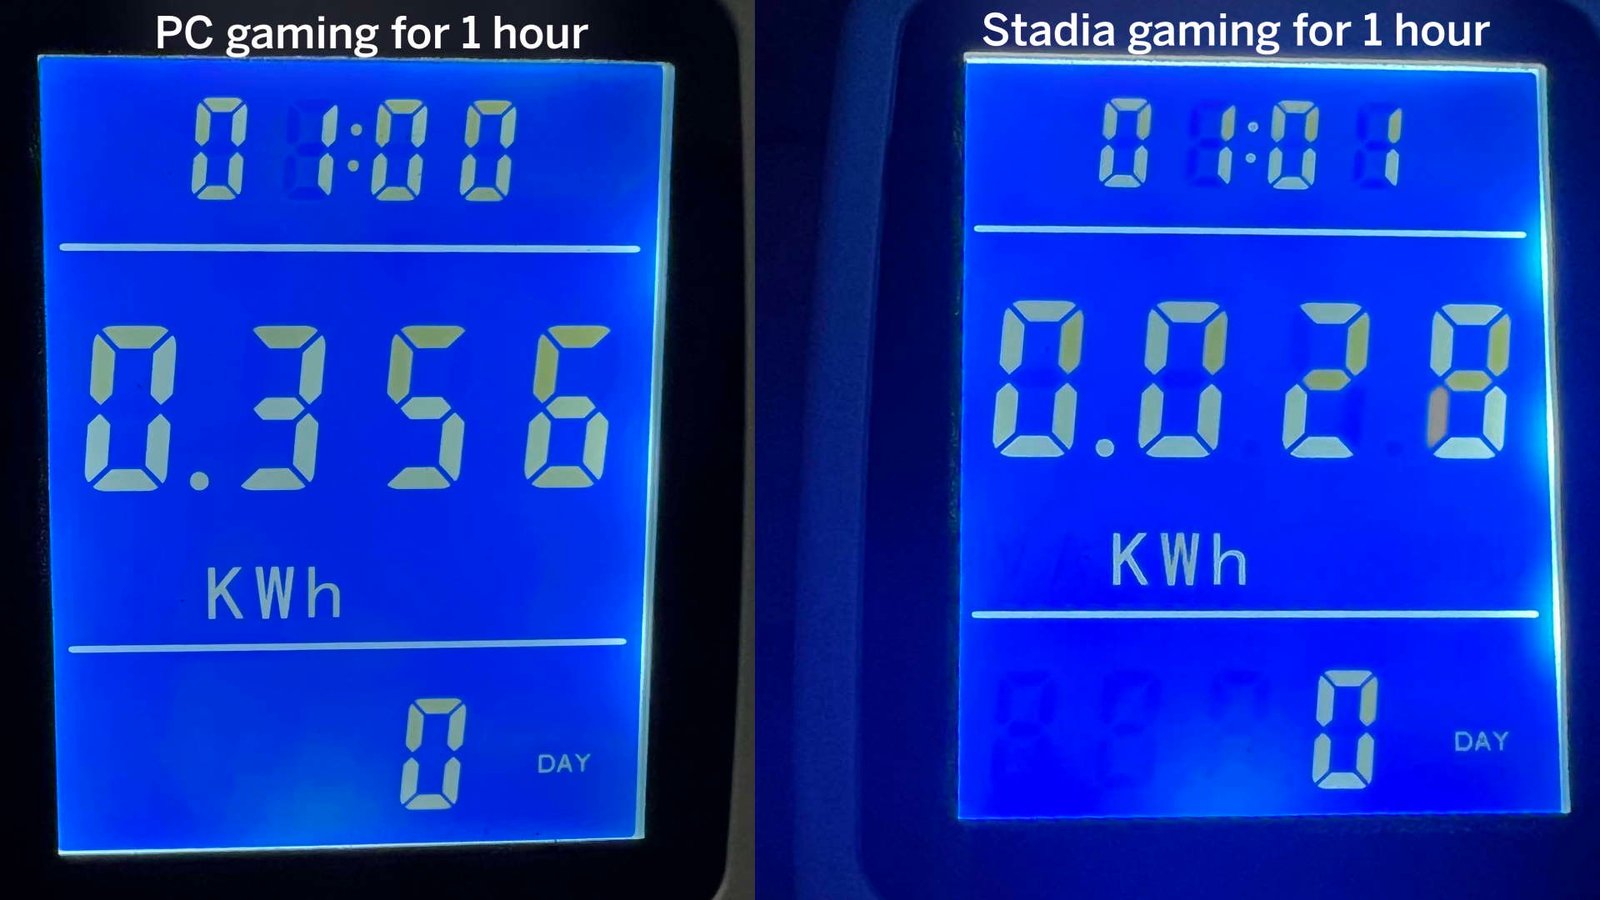 Power draw comparing gaming PC to Stadia for 1 hour's use